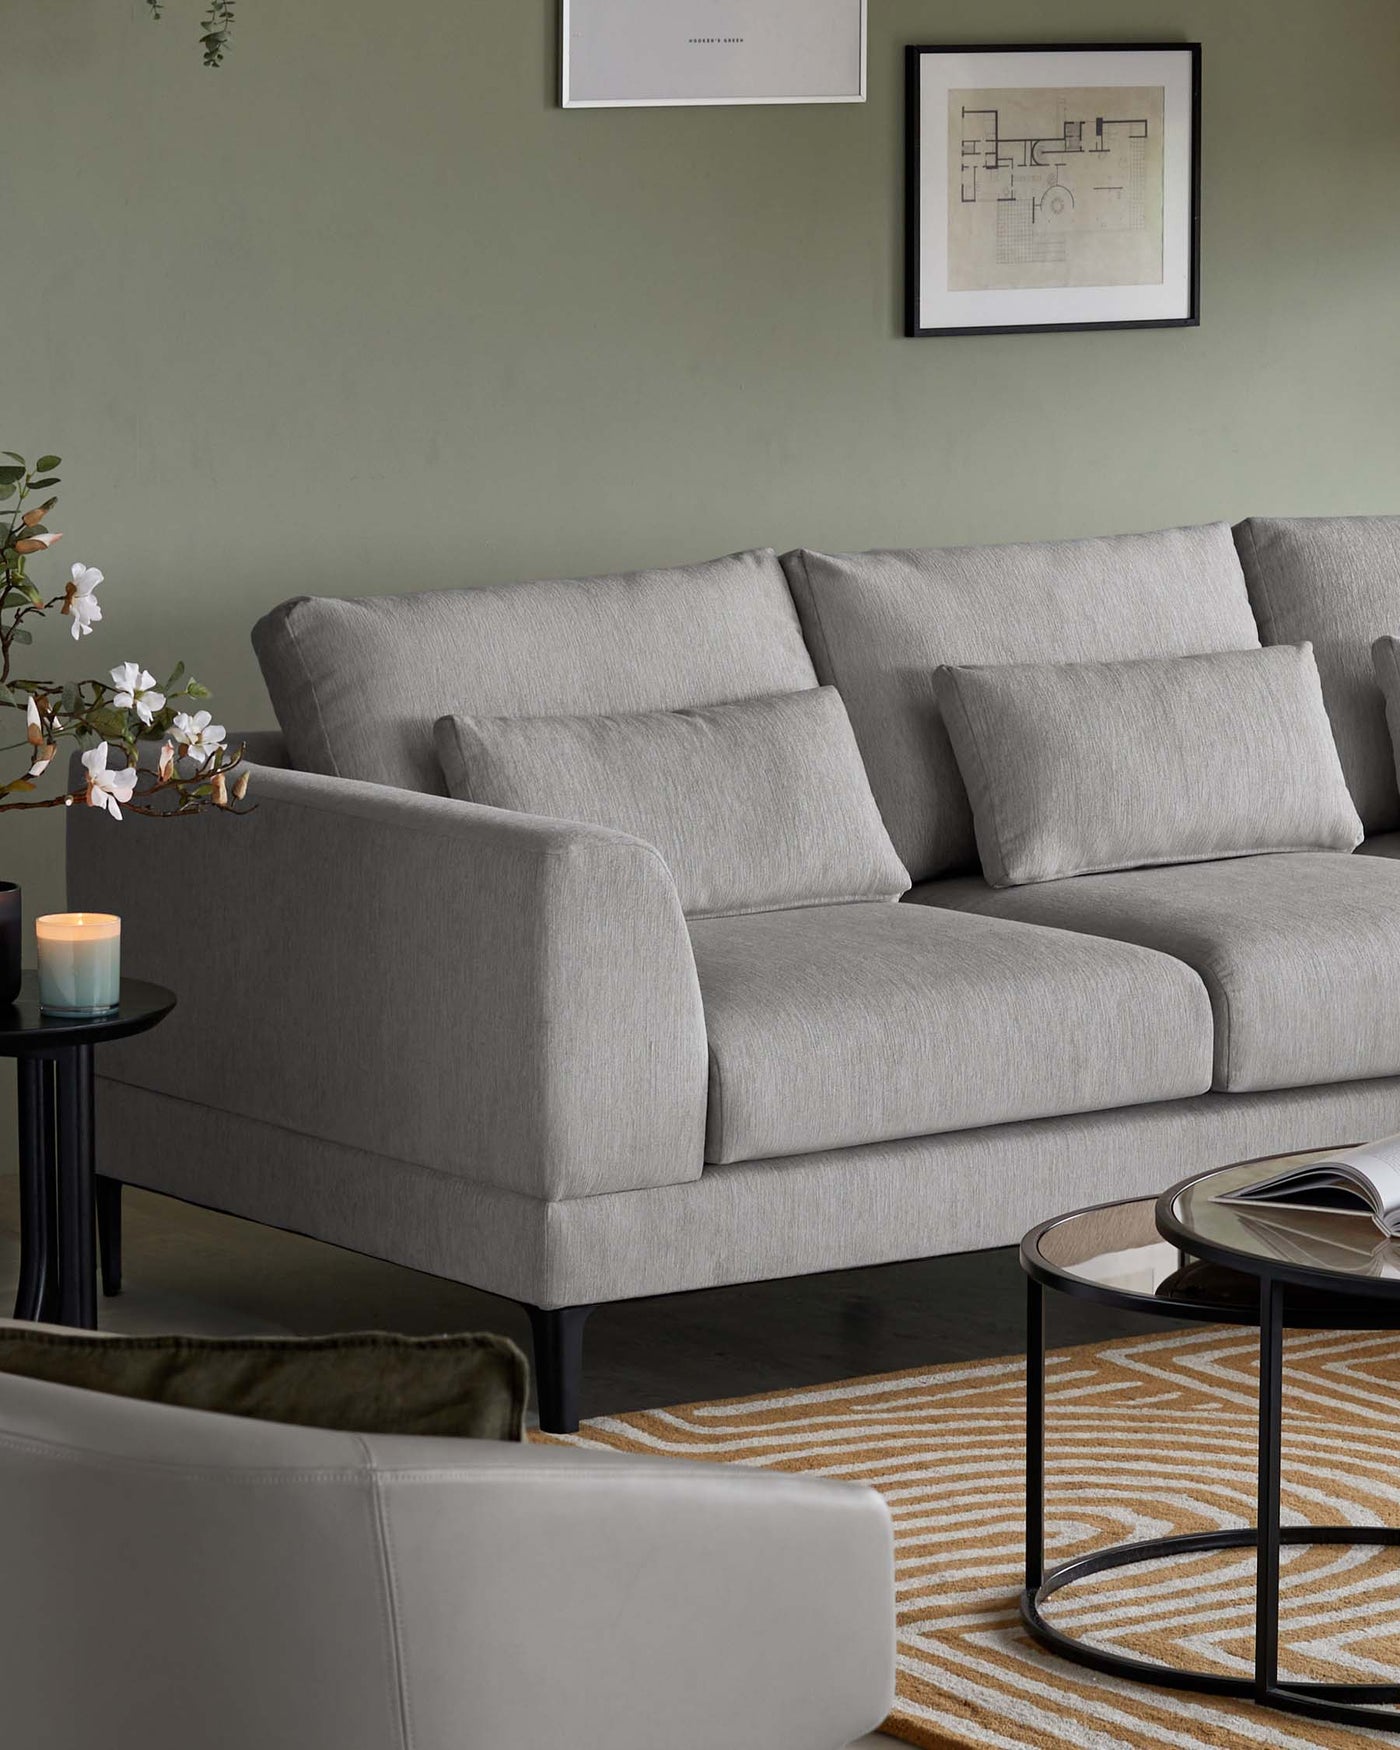 Modern three-seater sofa in light grey fabric with plush cushions and black tapered legs, paired with a round, black-framed side table featuring a glass top. A striped area rug in warm tones accents the floor beneath the furniture. A simple framed artwork hangs on the wall above the sofa, complementing the clean, contemporary design aesthetic.